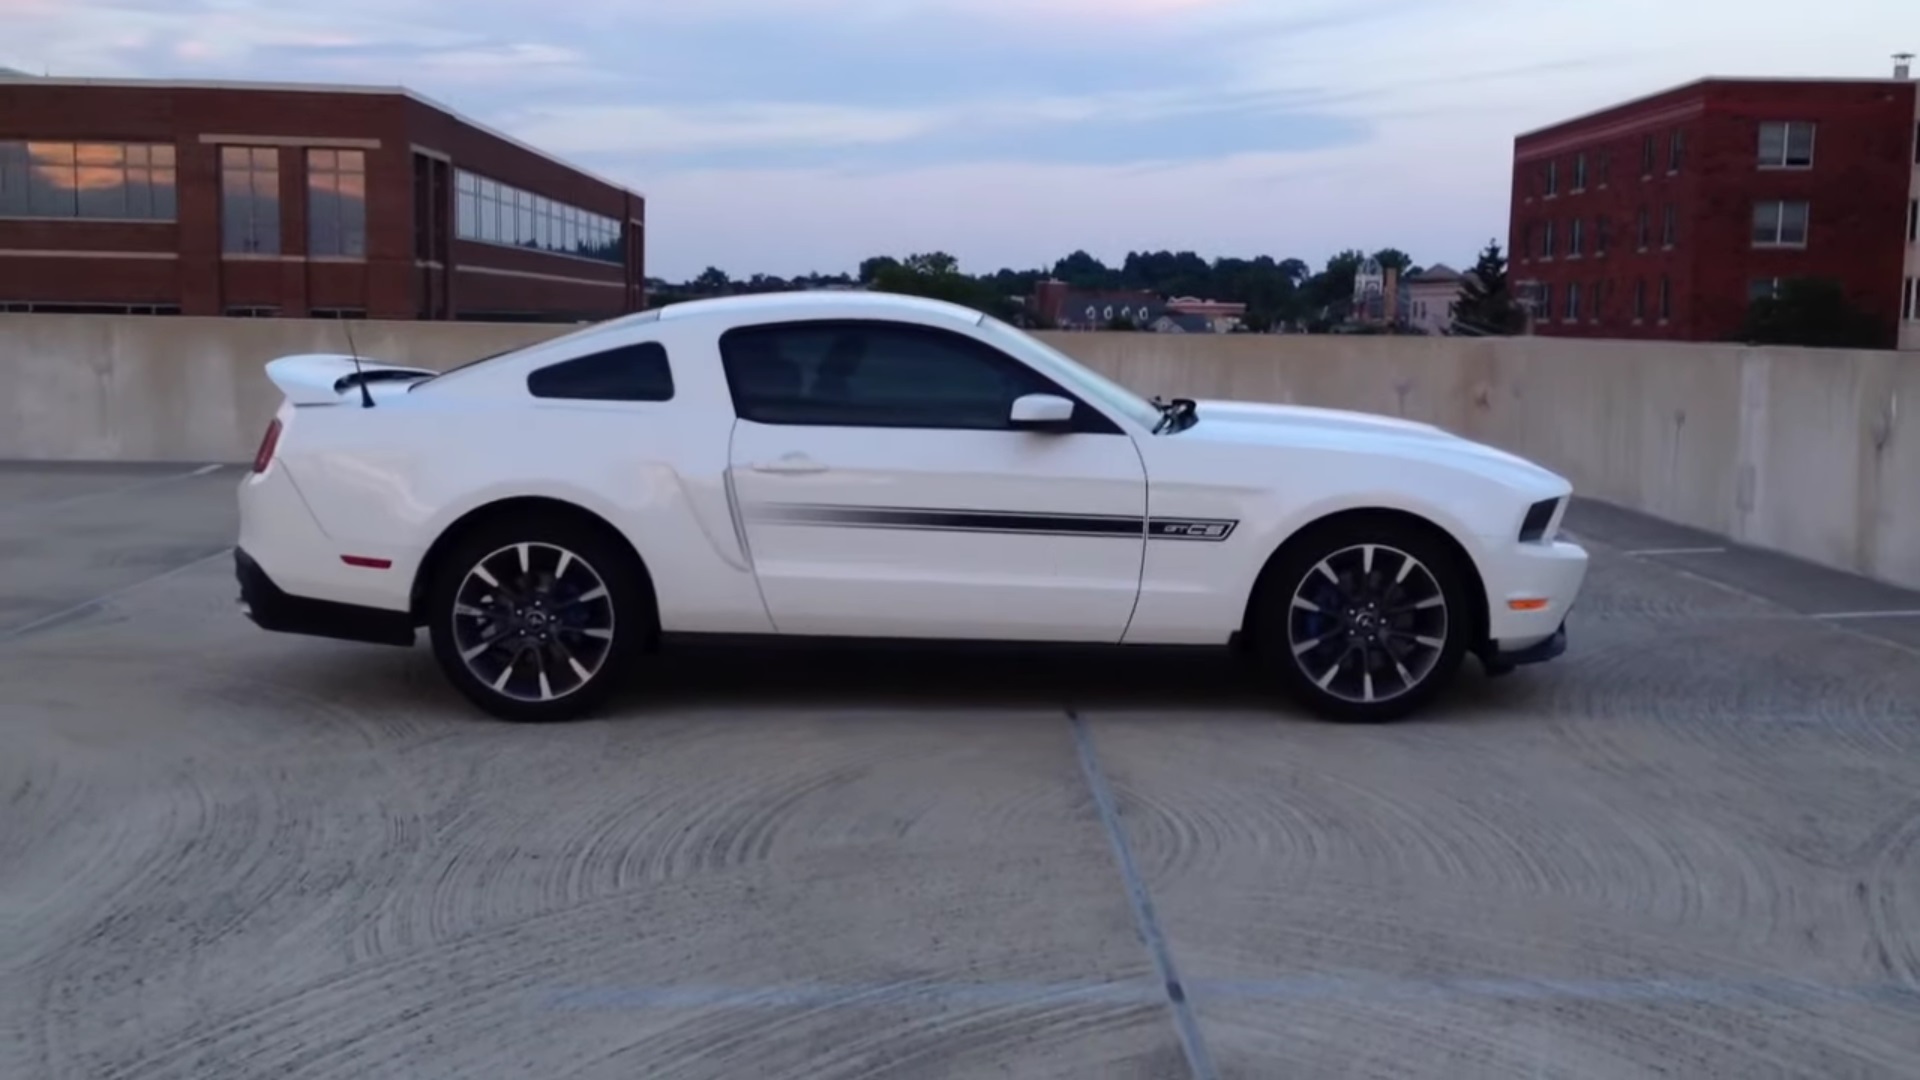 Video: 2011 Ford Mustang California Special In-Depth Tour